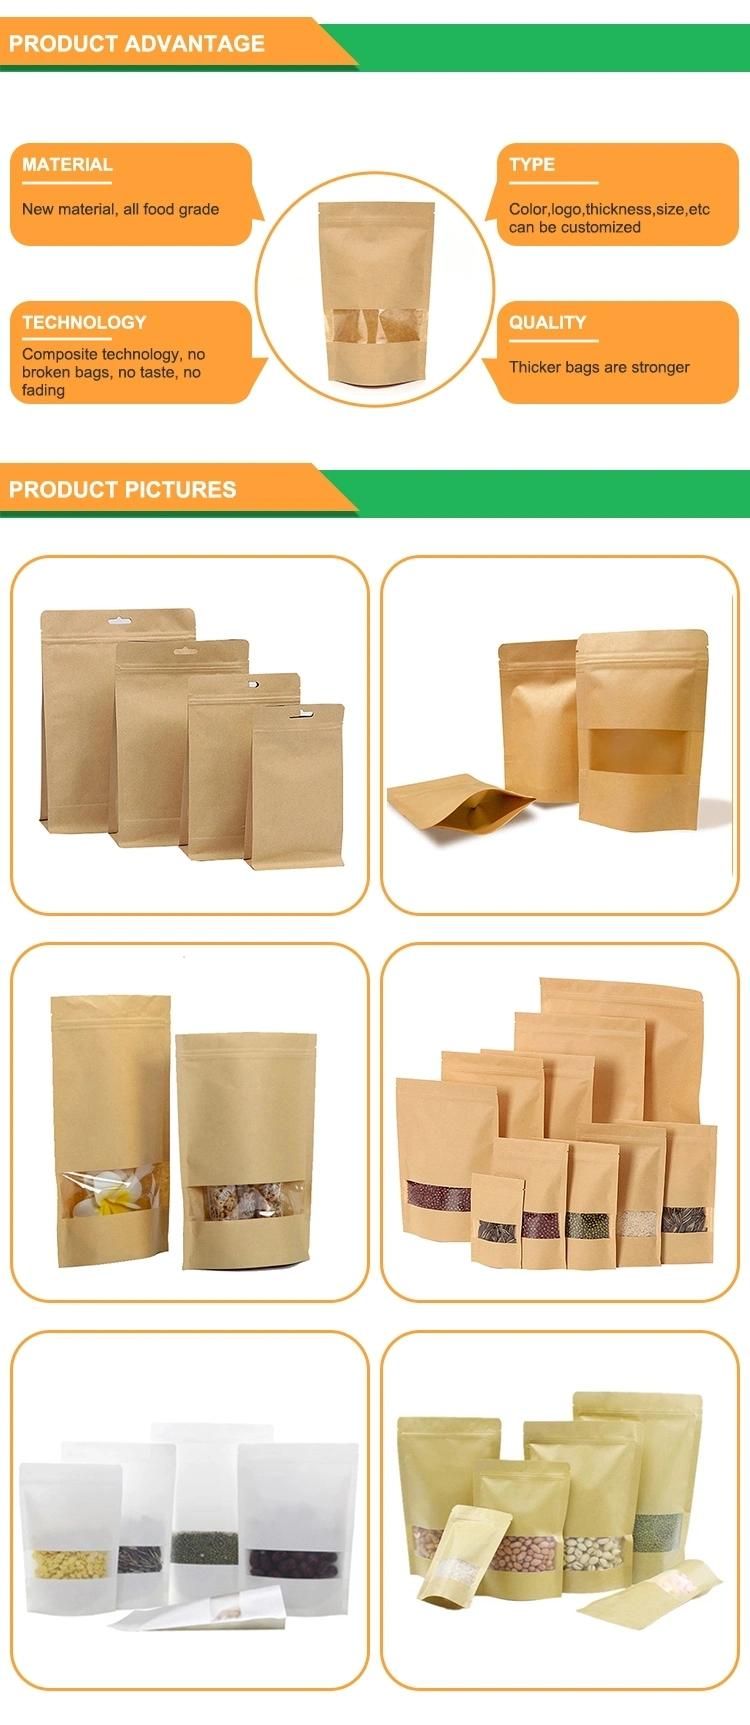 Stand up Brown Kraft Pouch Bag for Tea Dried Food Nuts with Ziplock